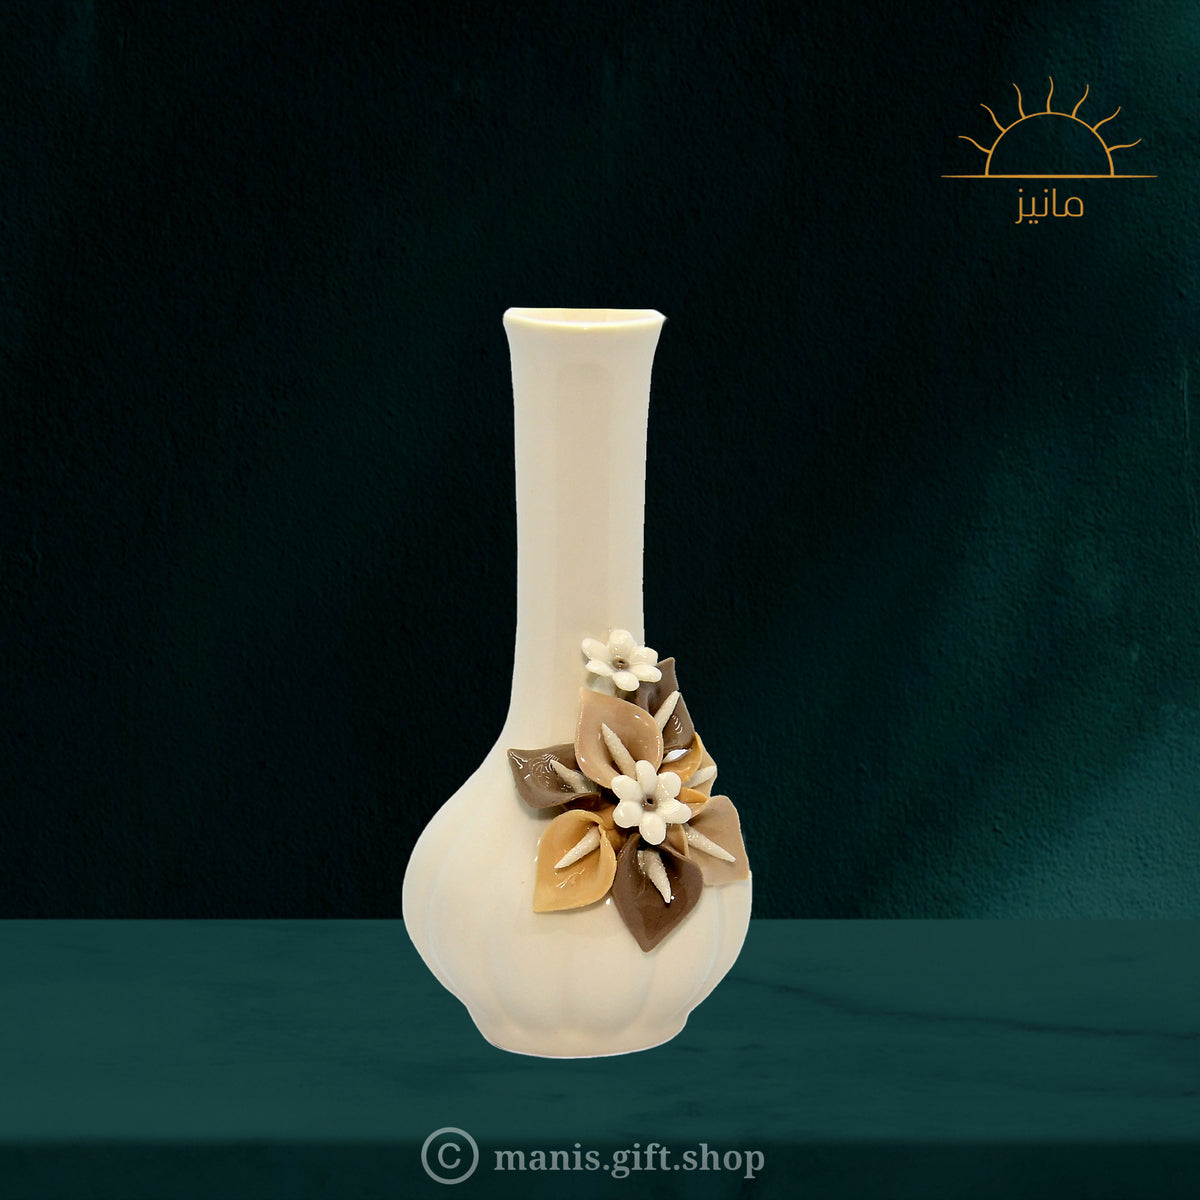 White Floral Vase With Brown and White Flower